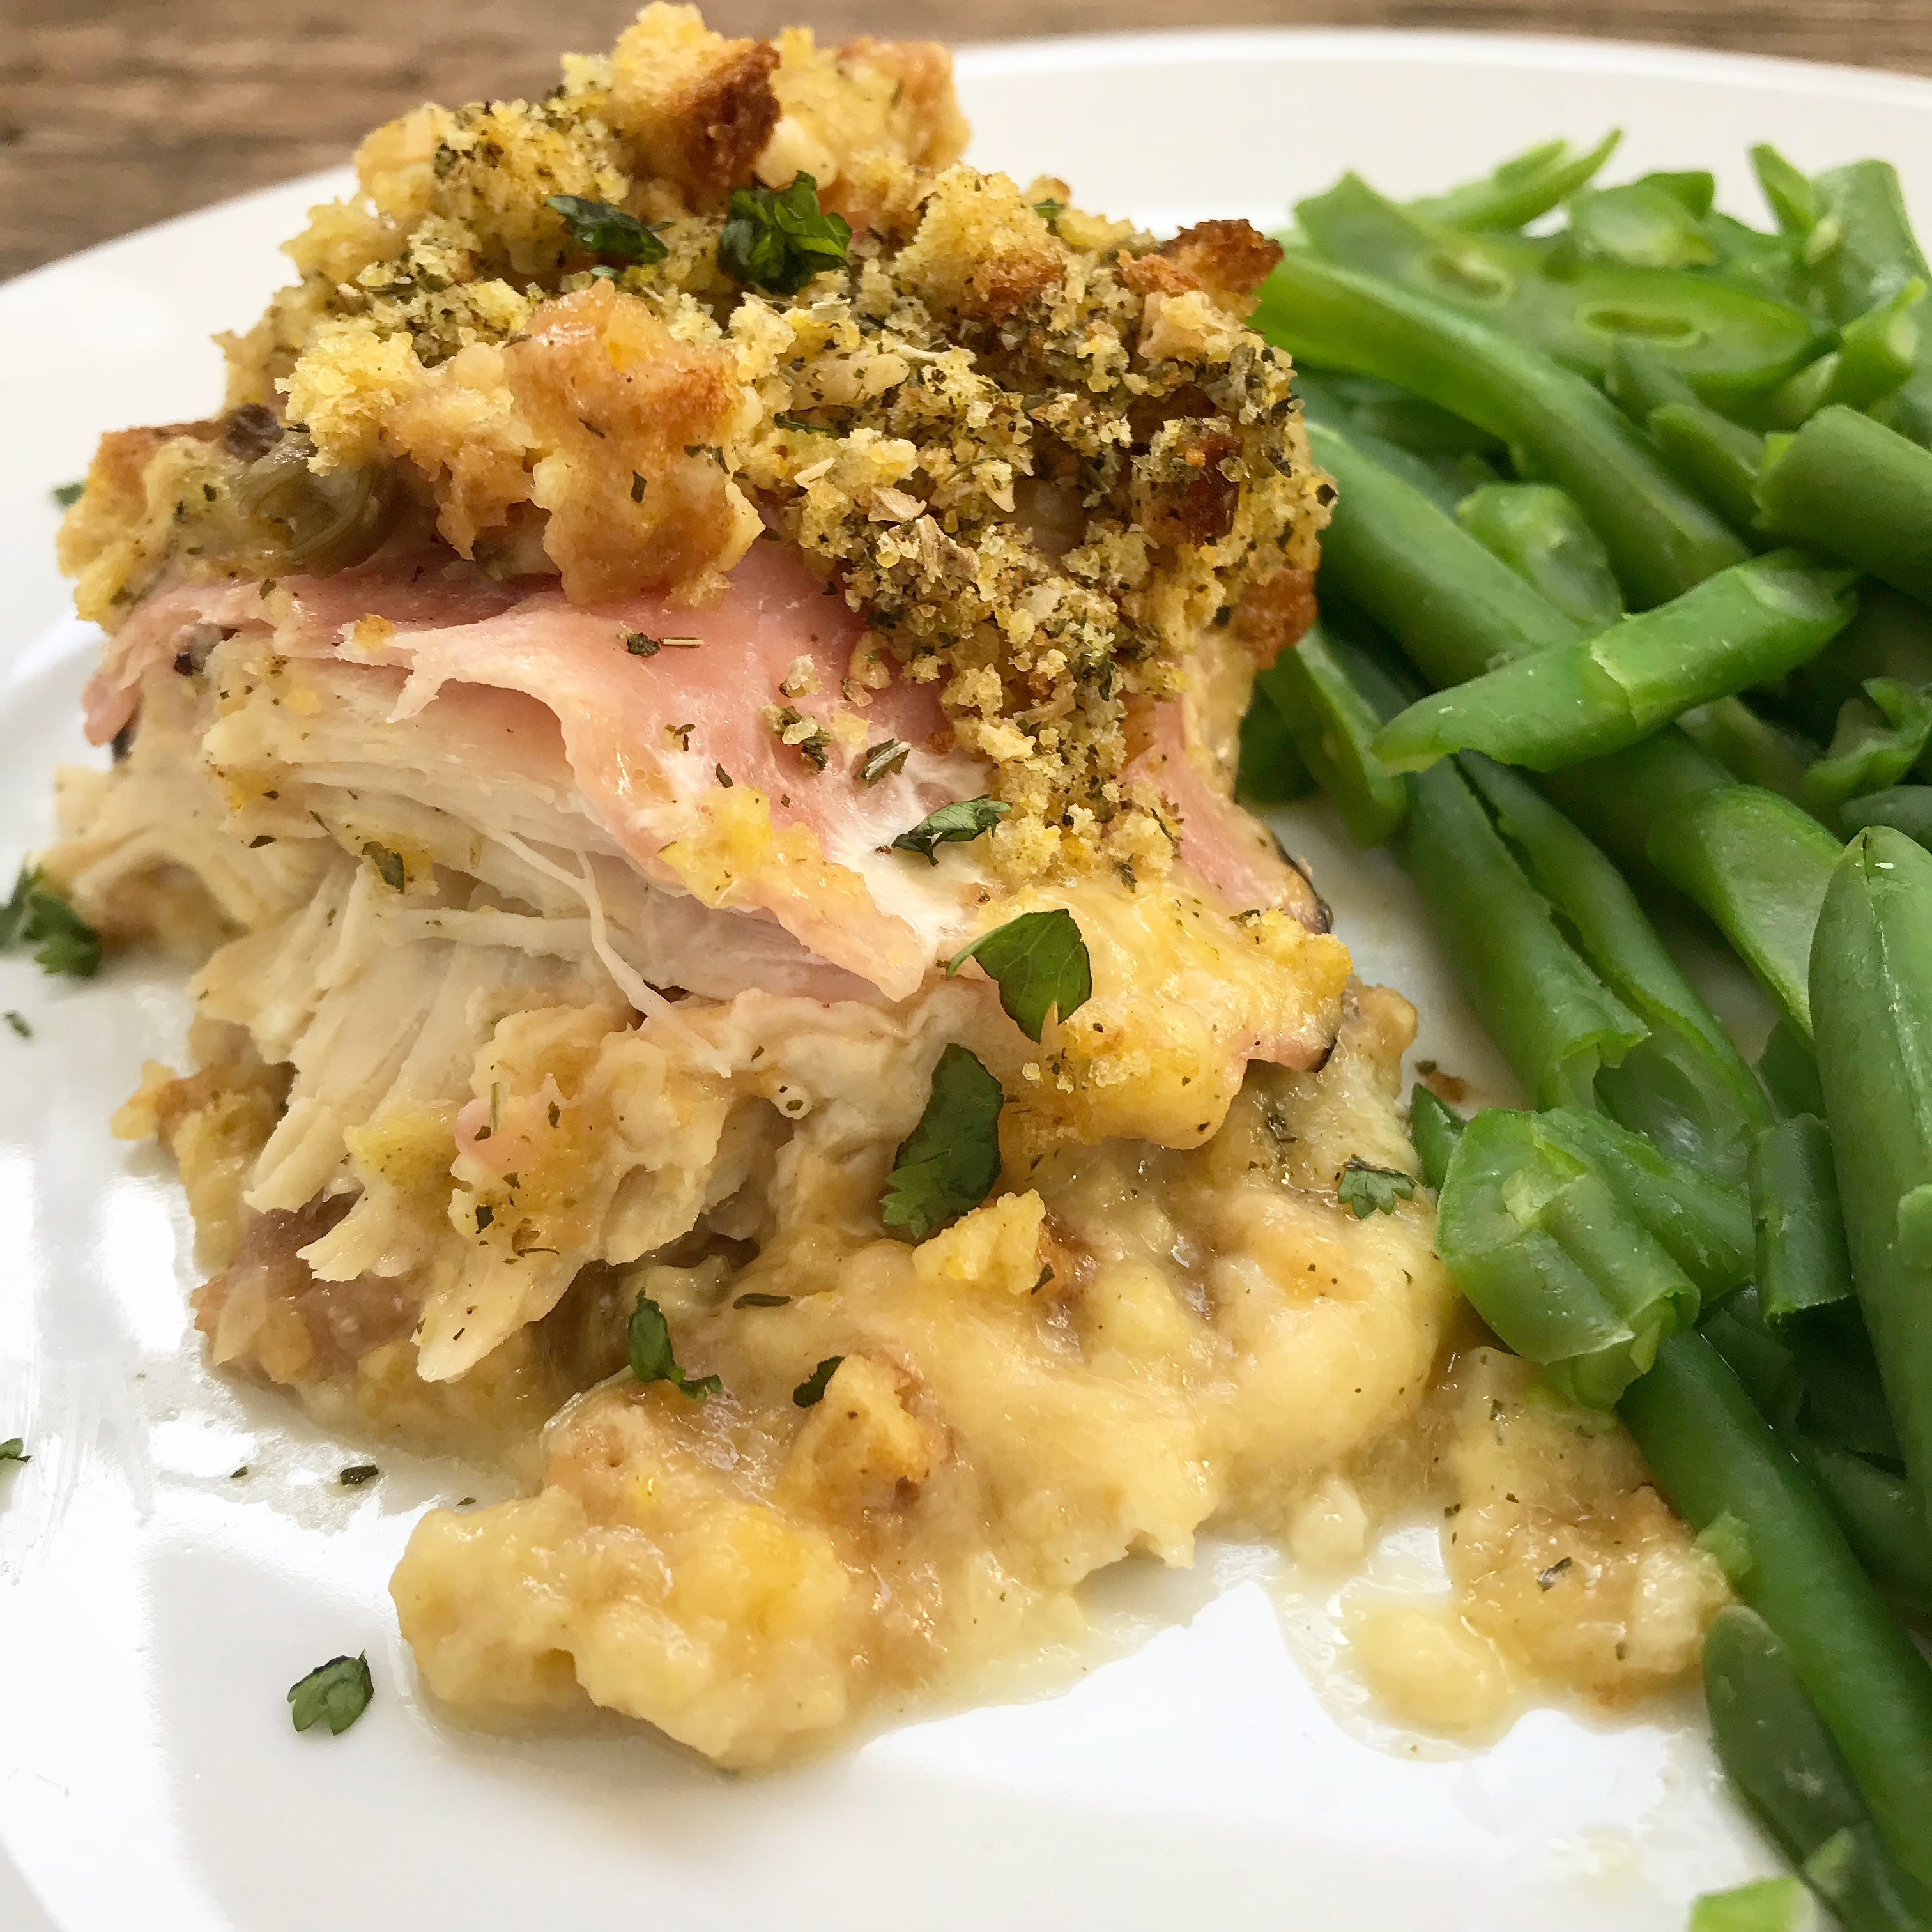 This skinny version of chicken cordon bleau uses a homemade sauce and gluten free stuffing for a healthier version of a comfort food classic.